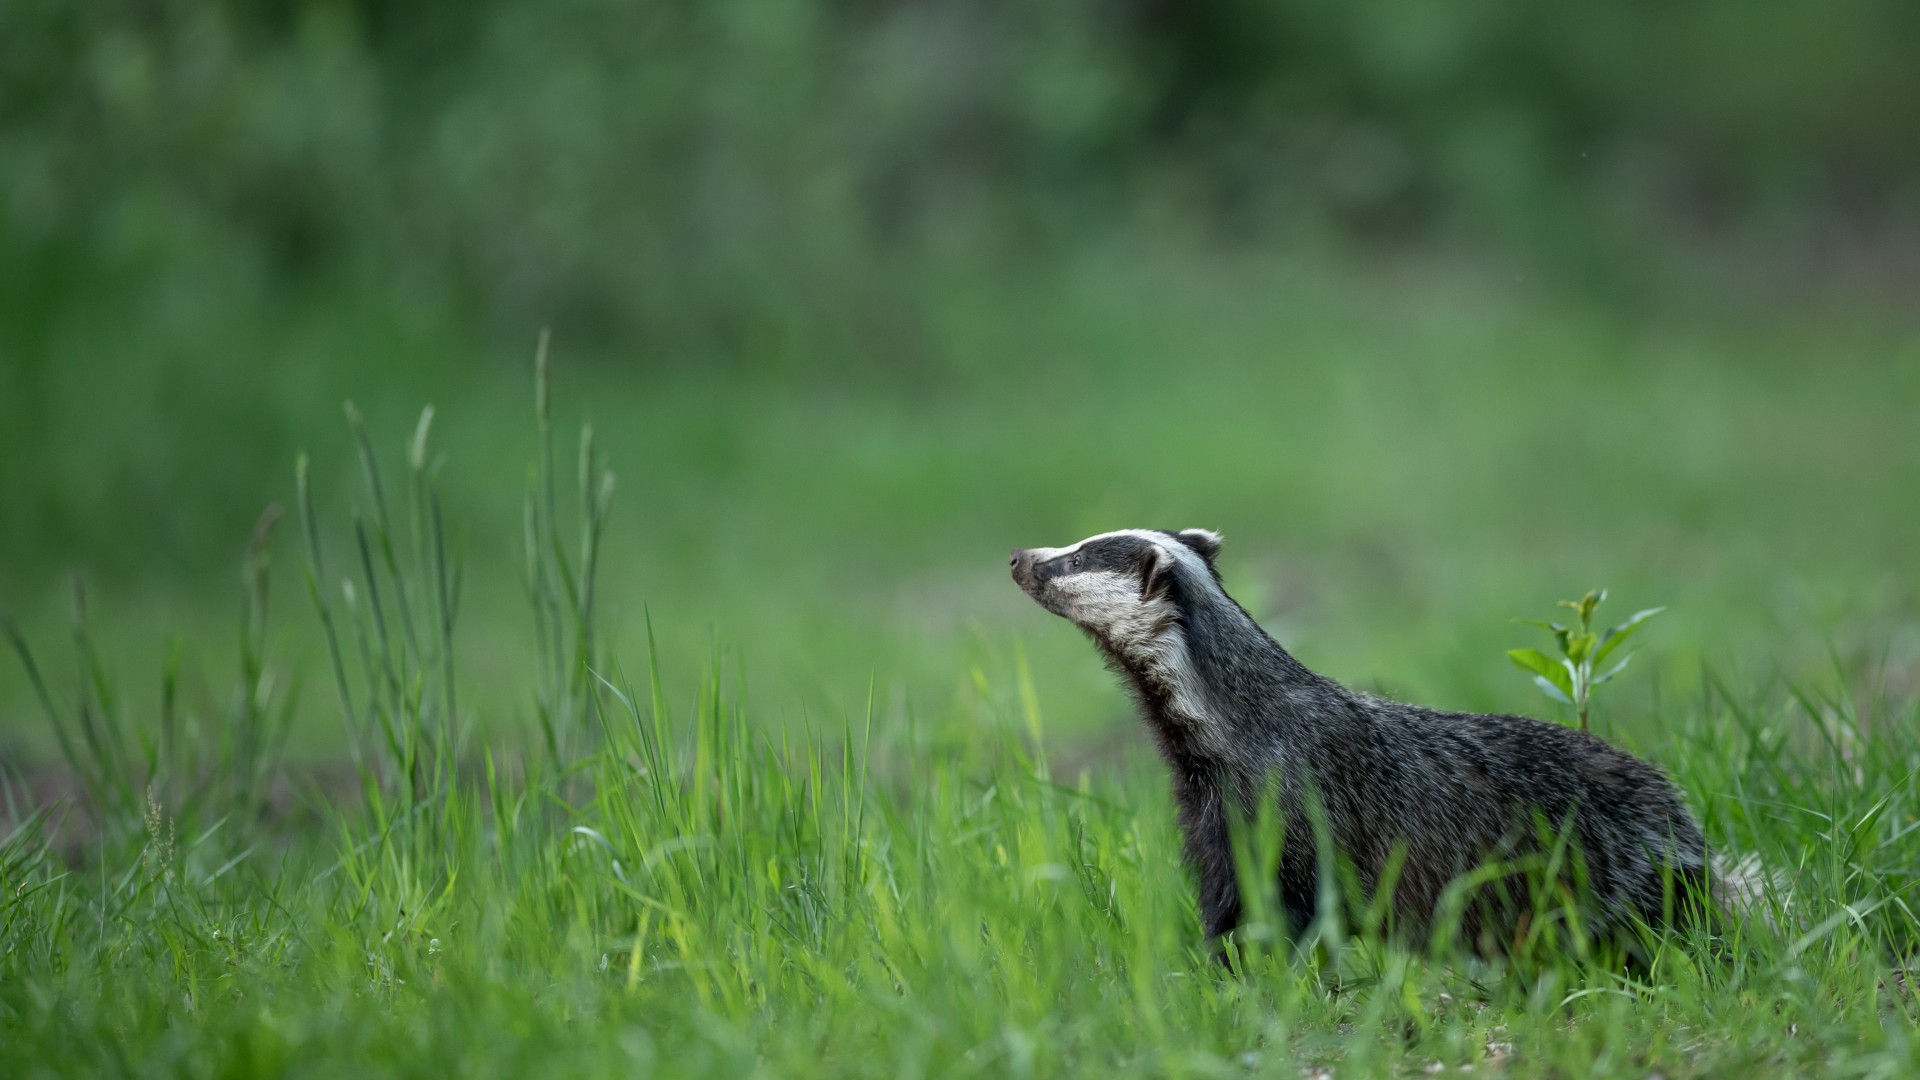 A badger in a meadow of green grass. It is looking up to the sky